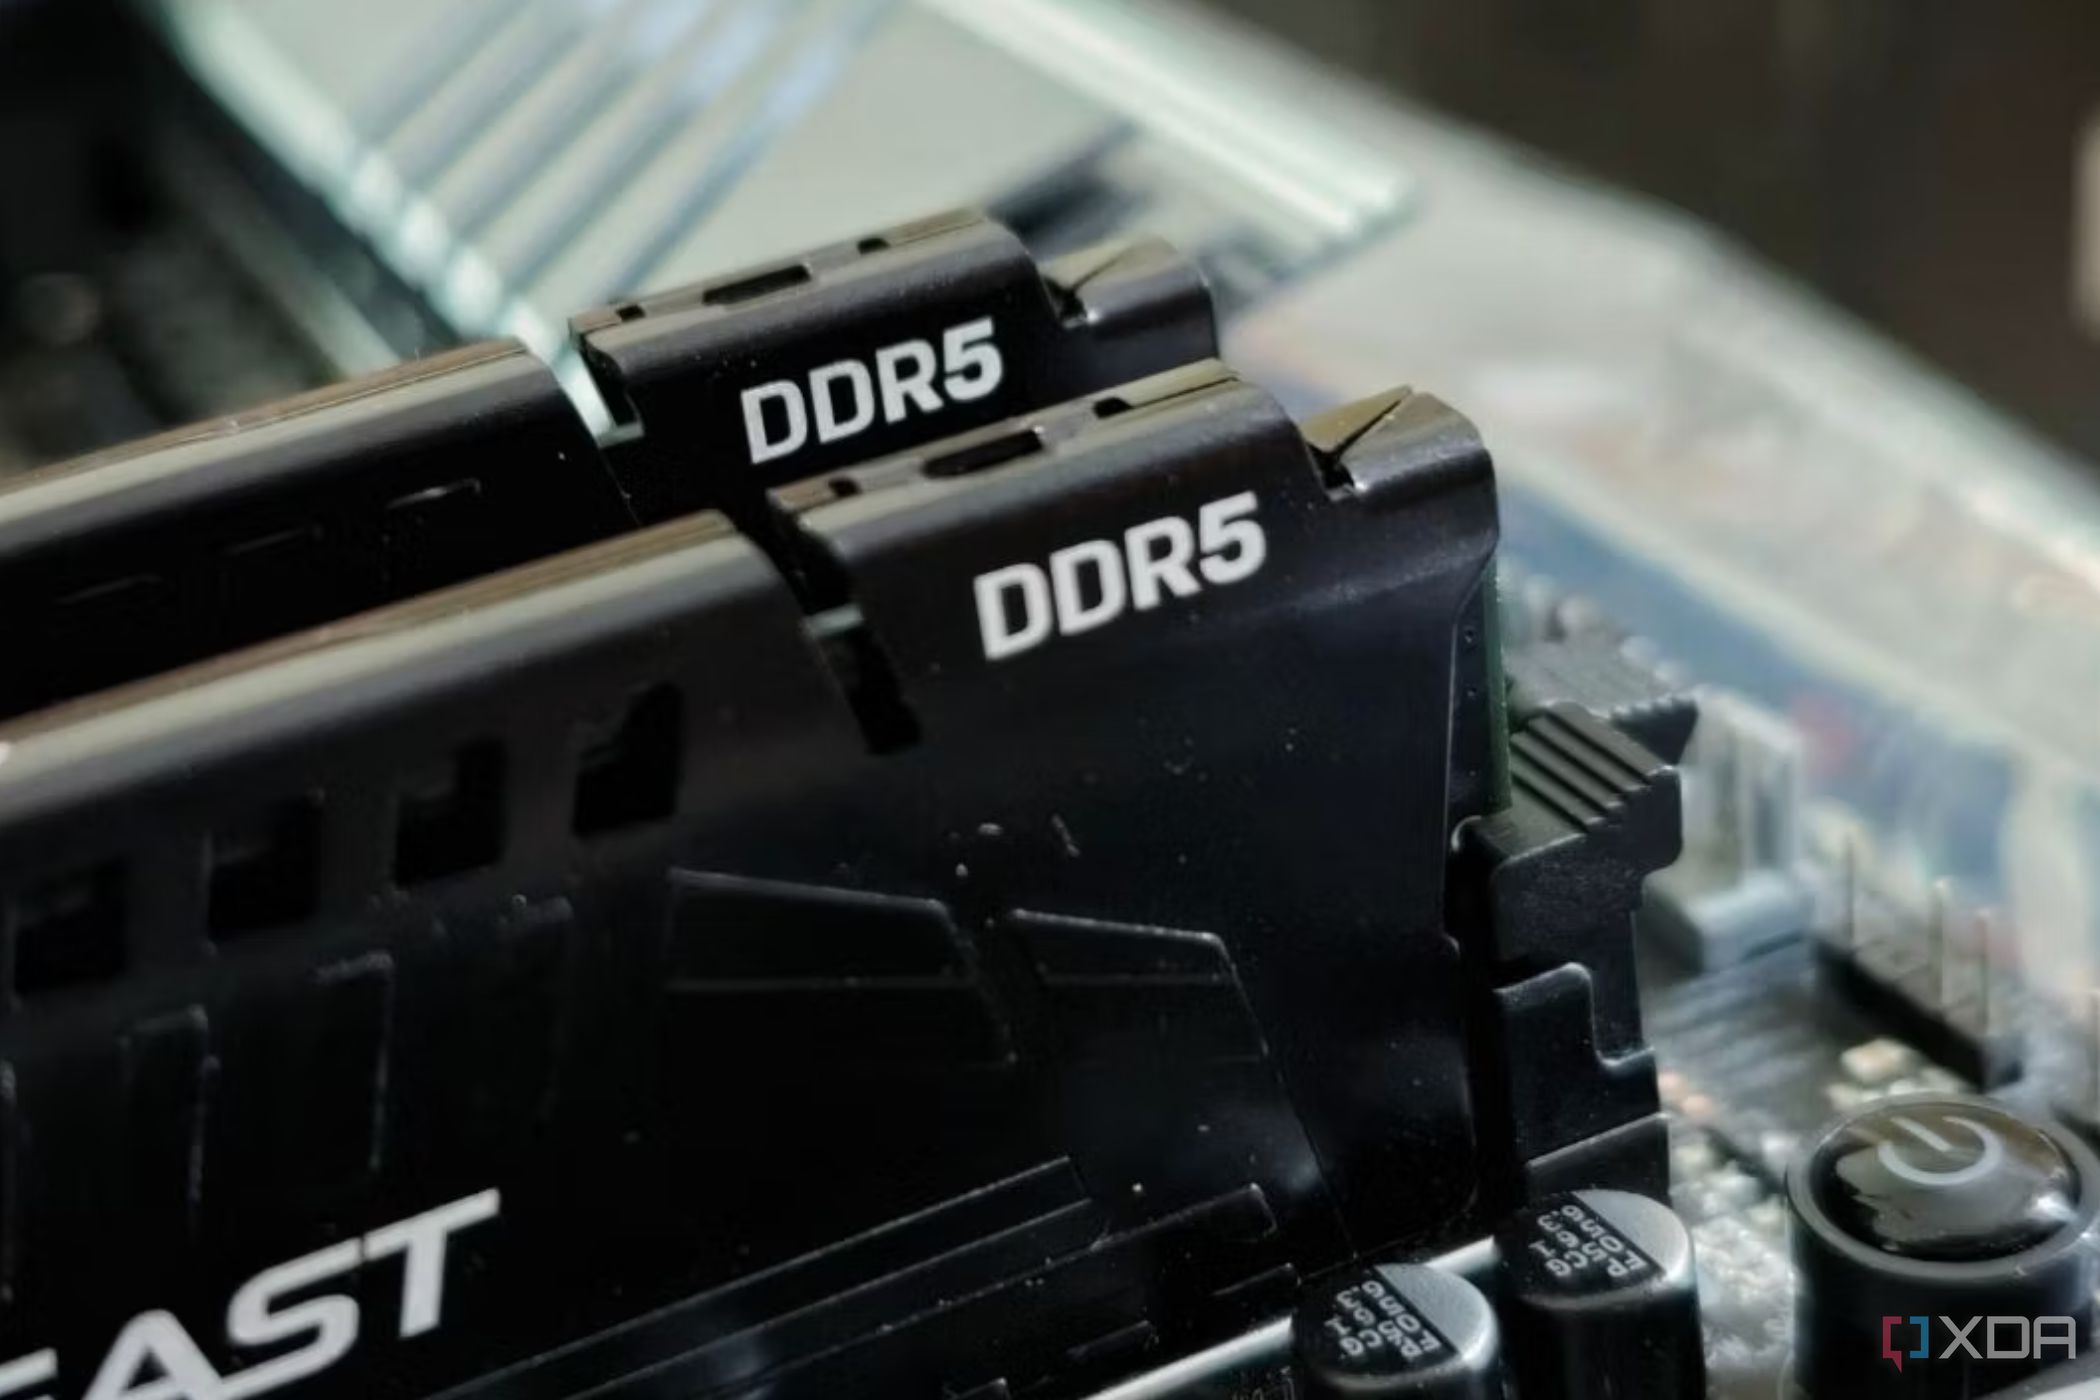 Image showing two DDR5 memory sticks installed on the motherboard